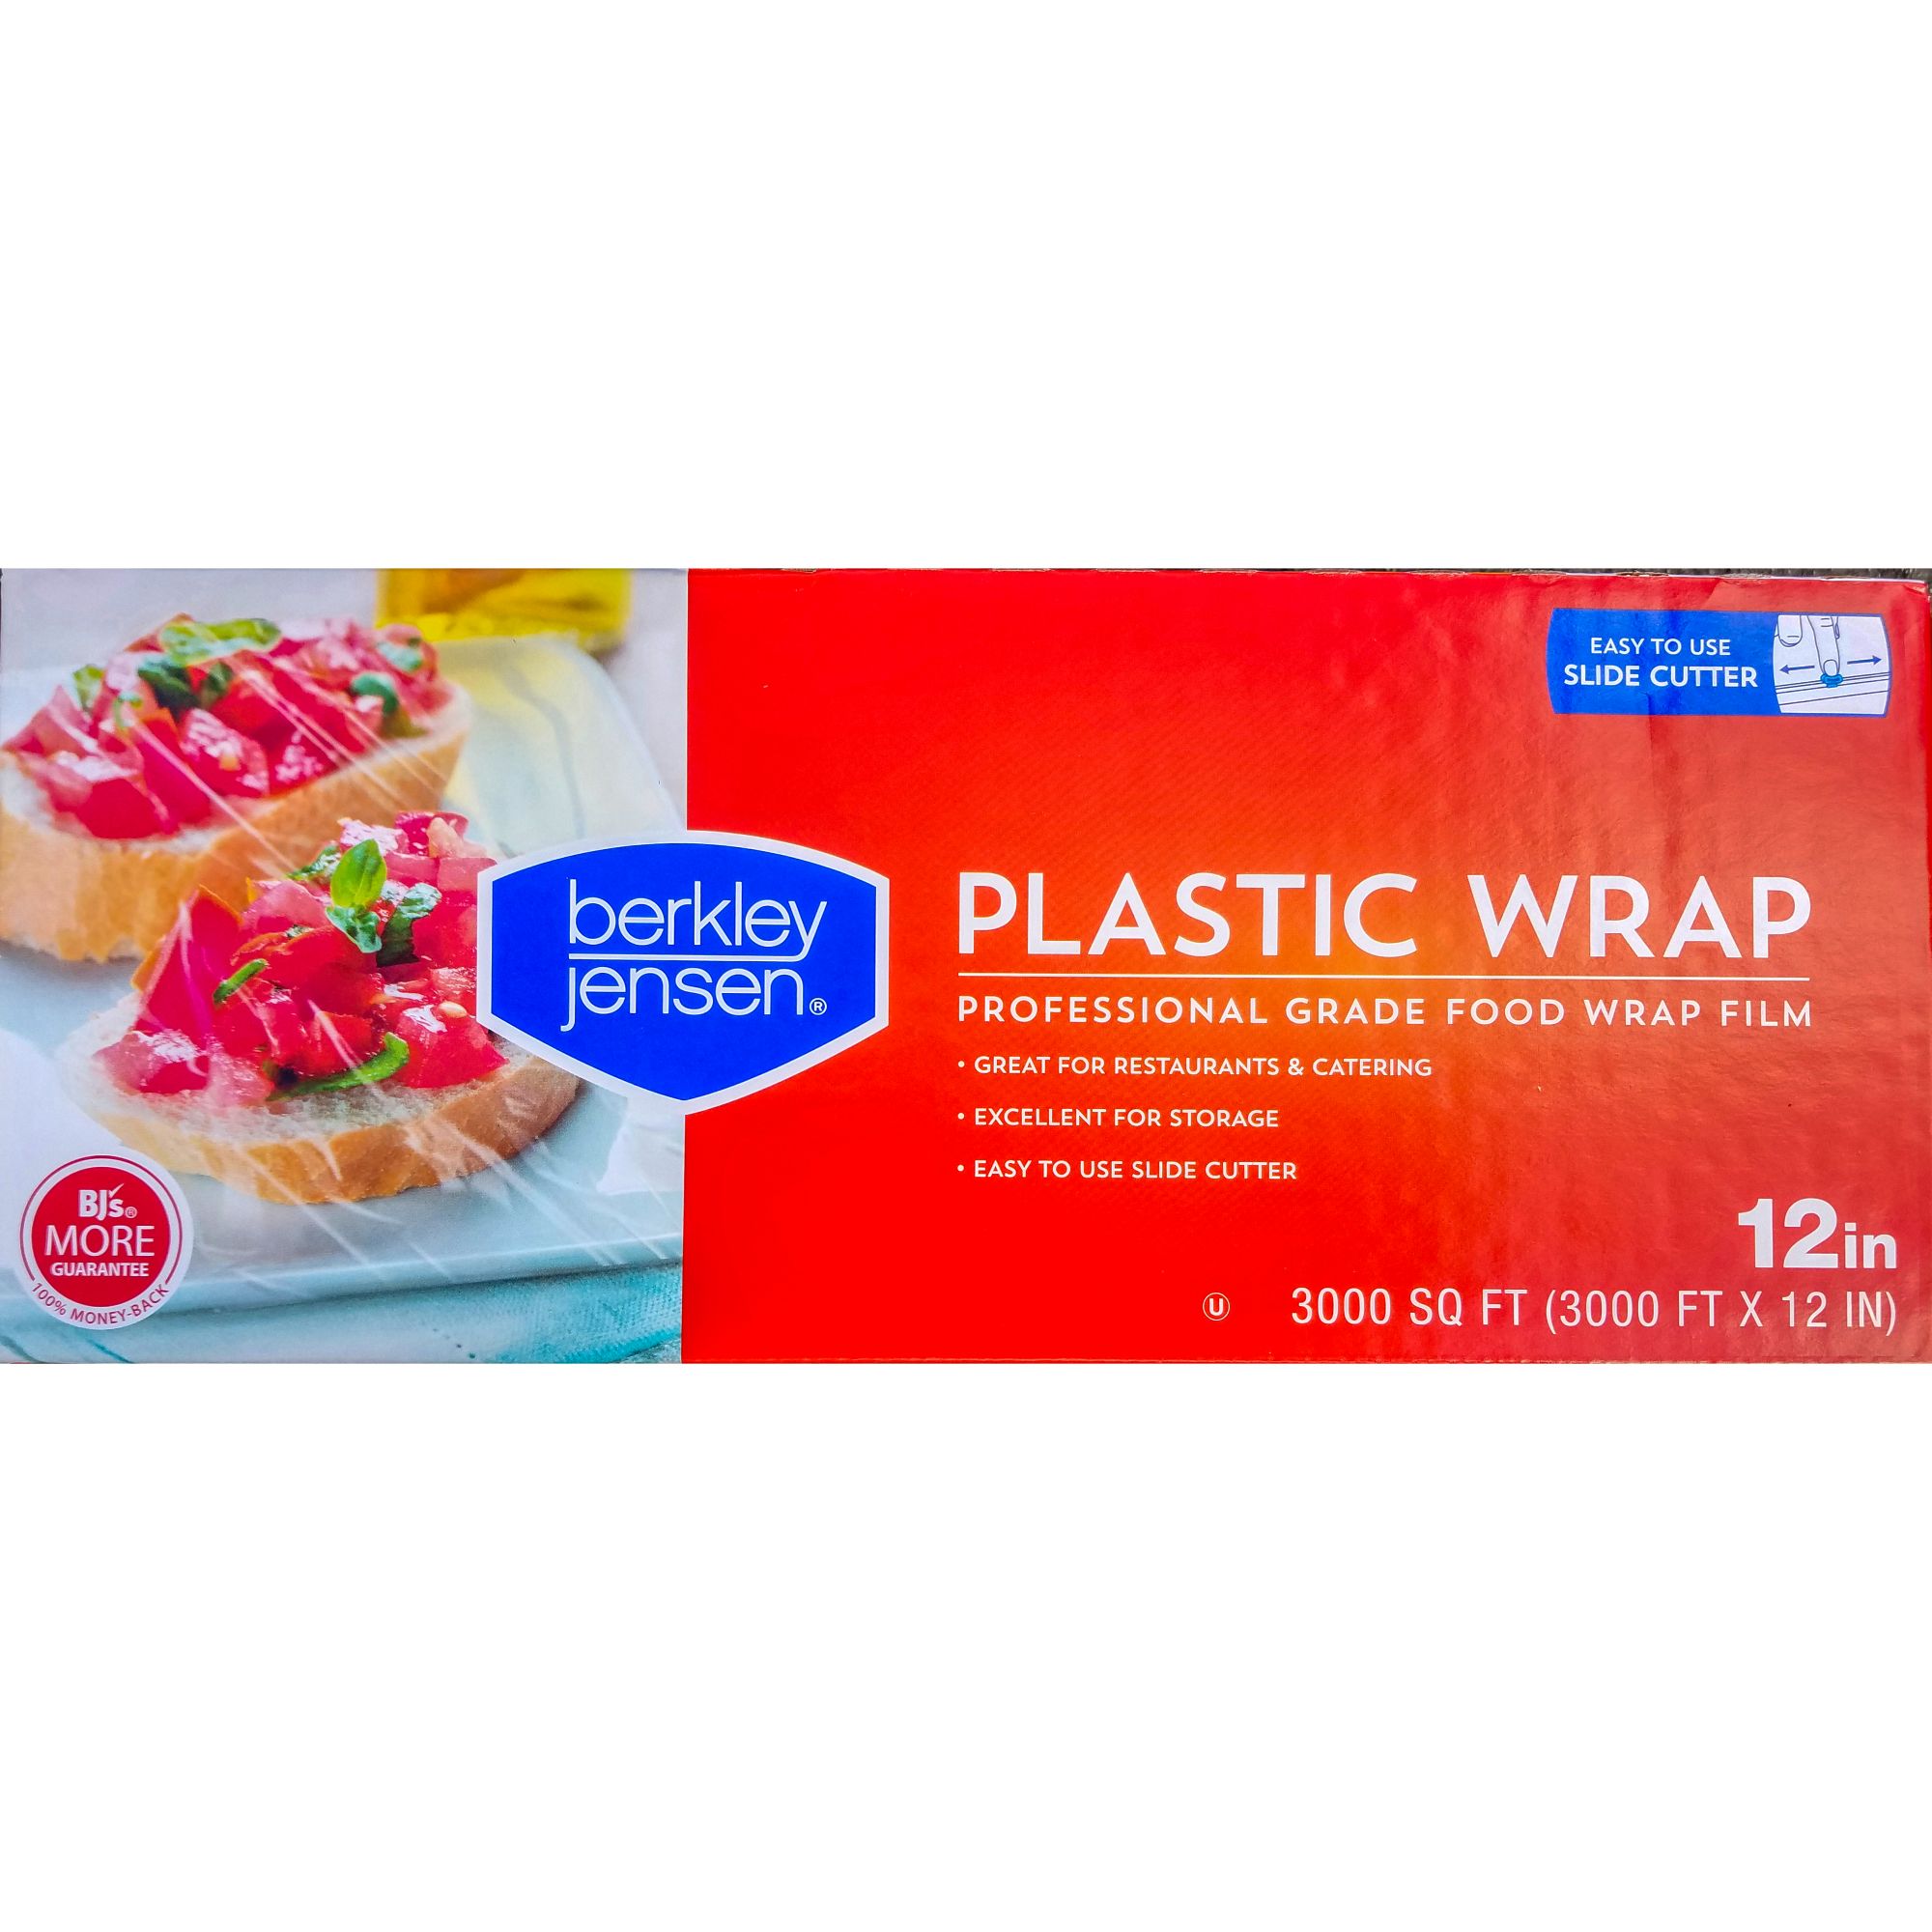 Disposaware Party Pack Takeout Containers, 25 ct.